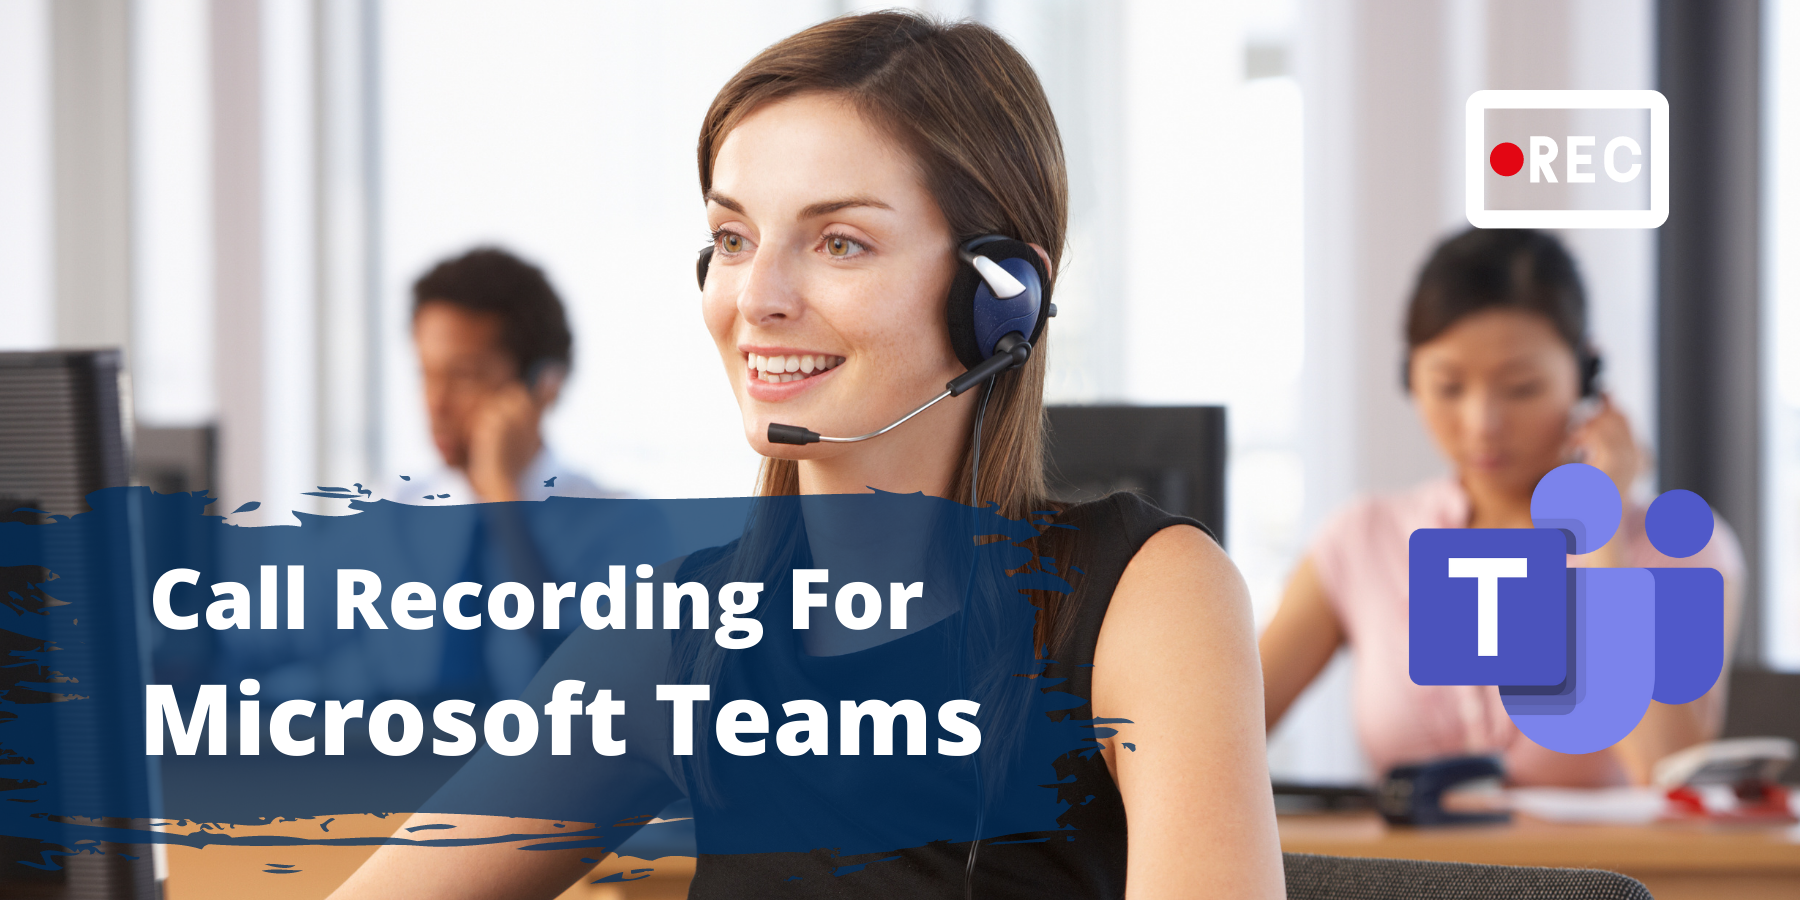 Call agent - call recording for Microsoft Teams